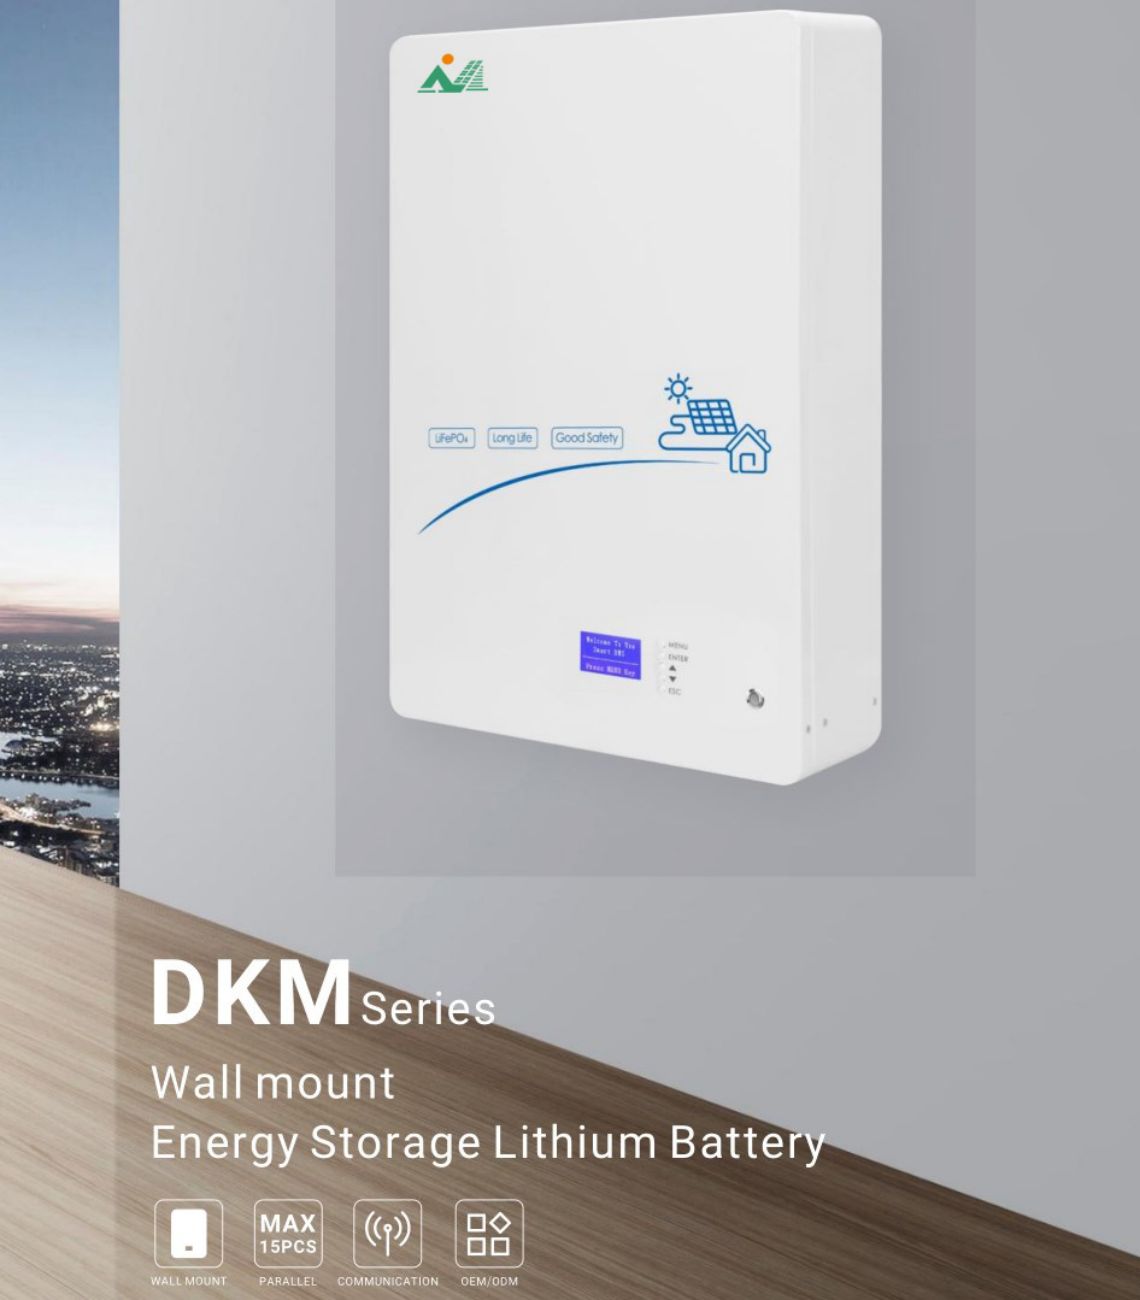 Wall mounted lithium energy storage battery